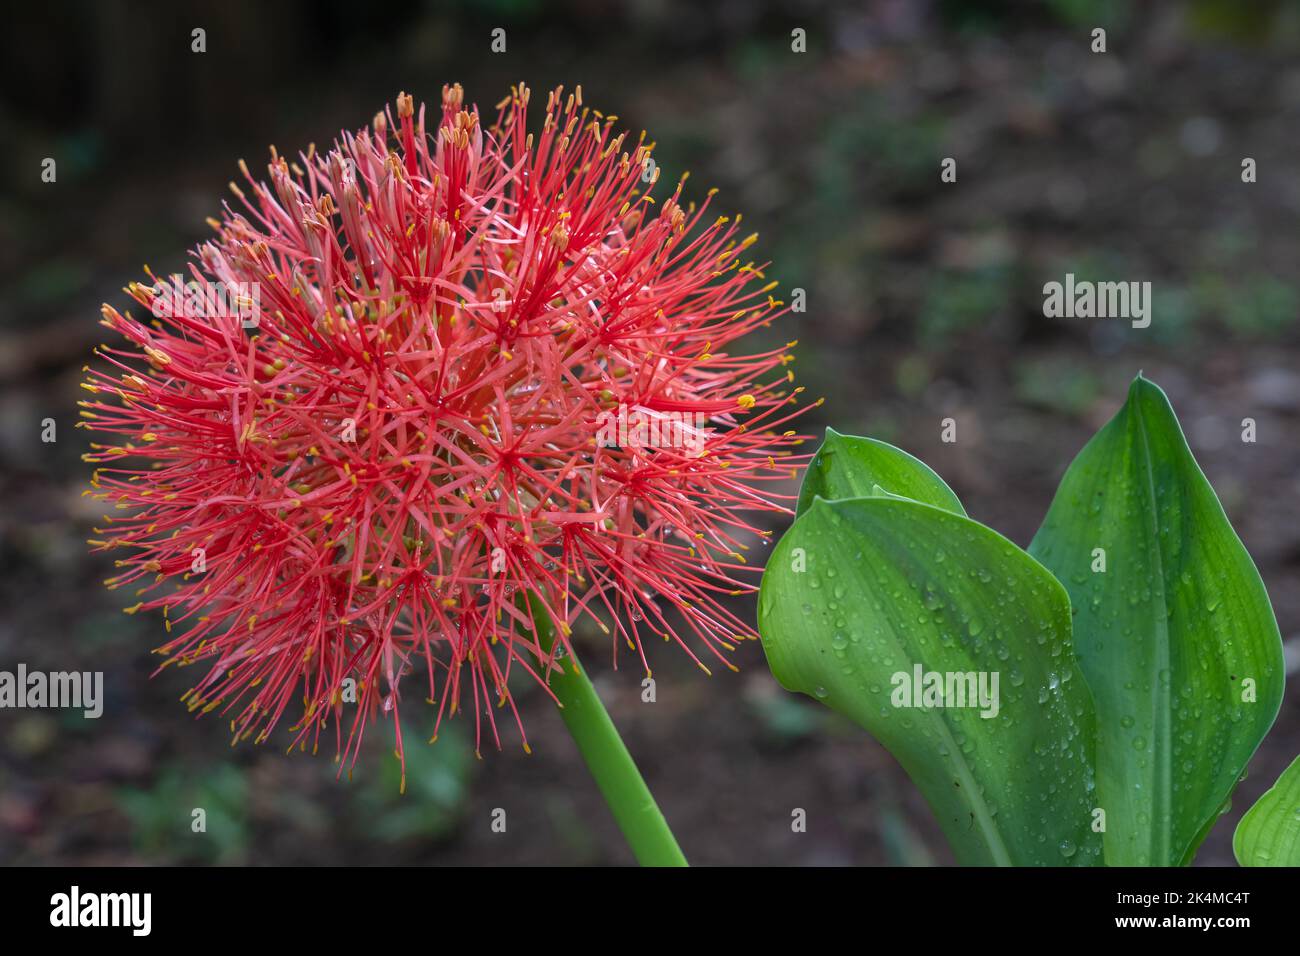 Closeup view of bright orange red flower of the blood lily aka scadoxus multiflorus in outdoor tropical garden isolated on natural background Stock Photo